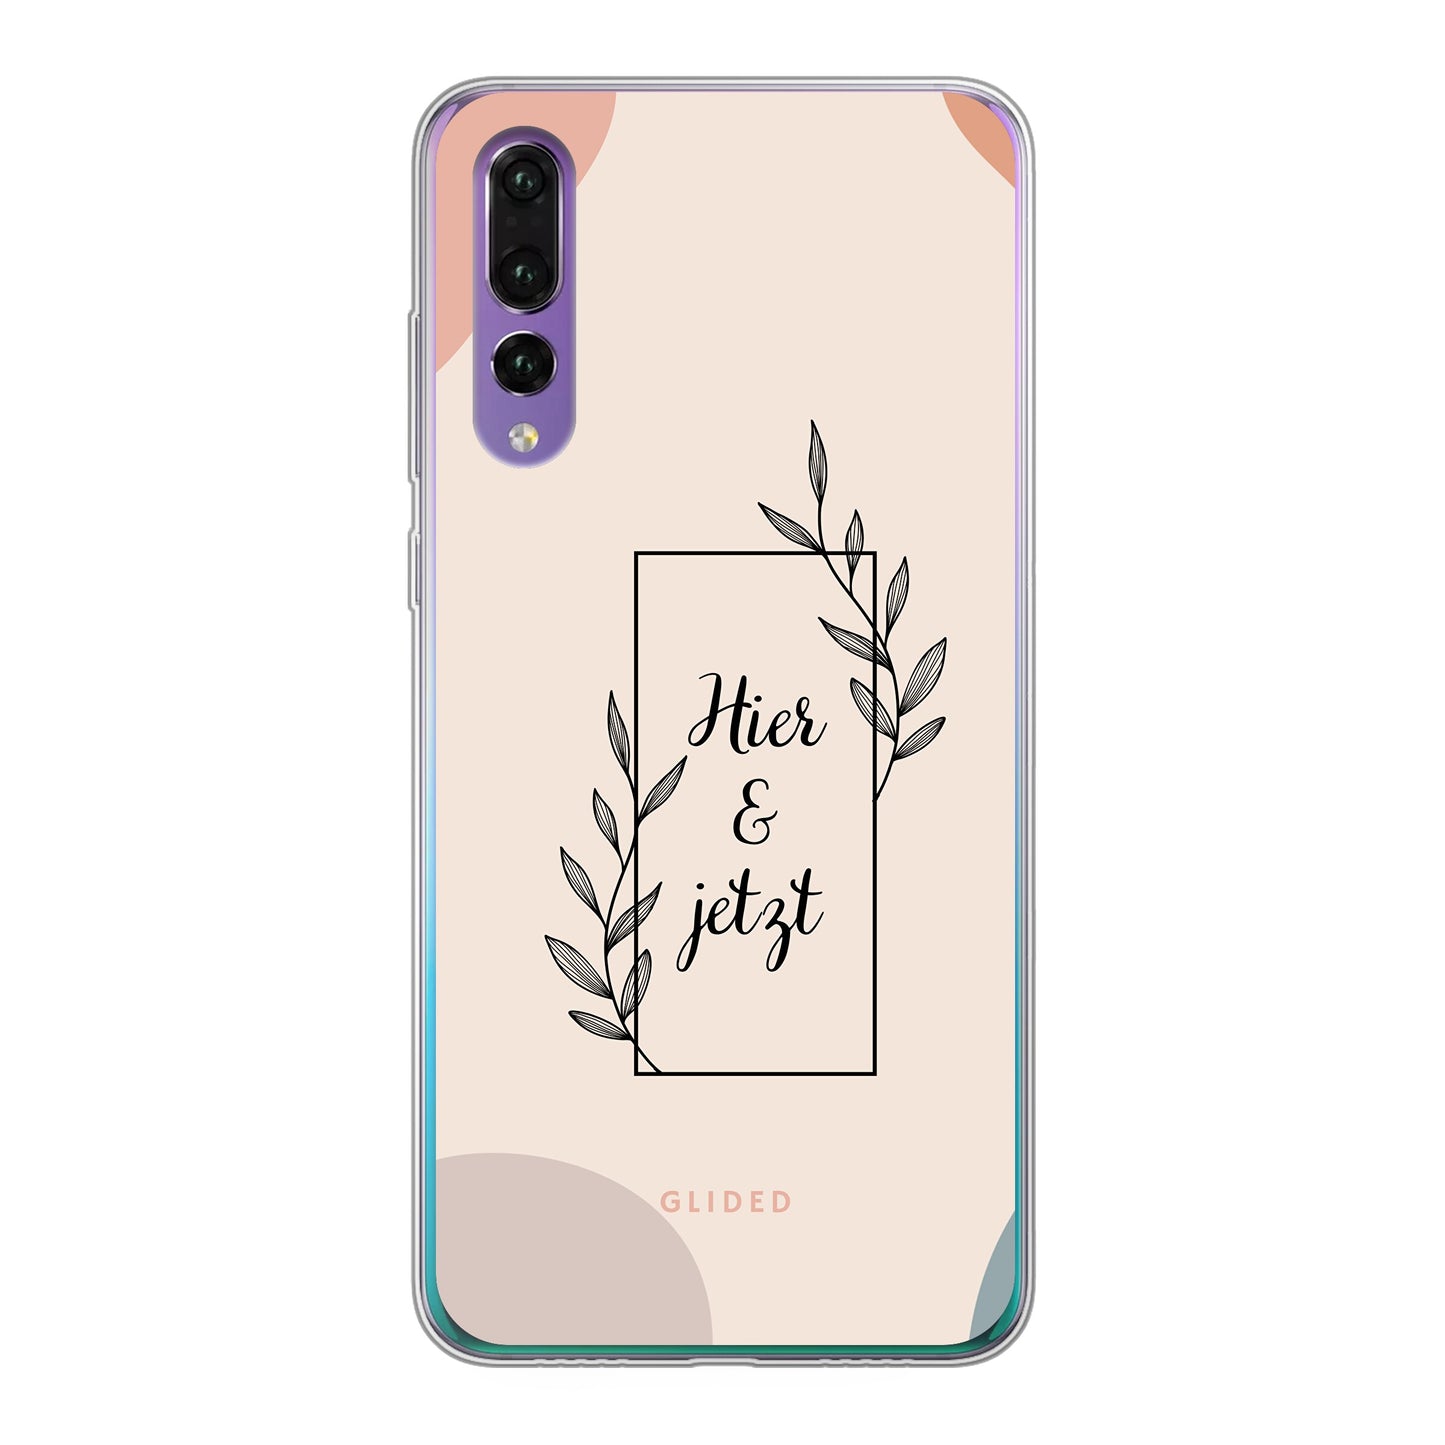 Now - Huawei P30 Handyhülle Soft case